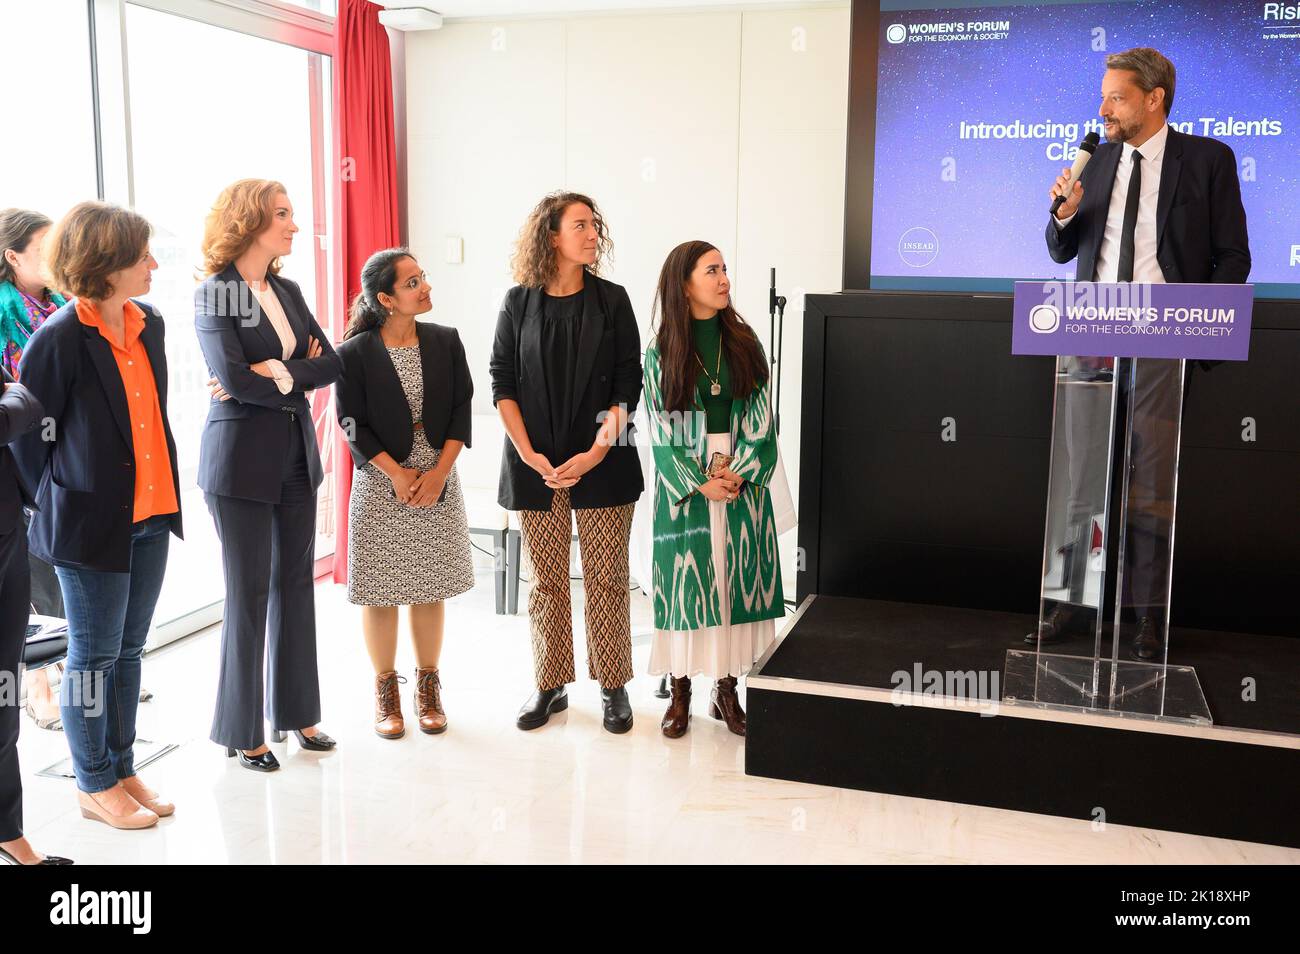 Souad Boutegrabet, CEO of Des Codeuses, Anne-Gabrielle Heilbronner, General Secretary of Publicis Groupe, Christel Heydemann, CEO of Orange, Fatimah Hossaini, Afghan artist and activist, Mastooraat , Jean-Marie Girodolle, Nupur Kohli, Dutch Founder and Director of NIIS Healthcare and Anne-Laure de Chammard, CEO of Energy Solutions International, ENGIE, at the Women's Forum Rising Talents event in Paris, France on September 16, 2022. Photo by Laurent Zabulon/ABACAPRESS.COM Stock Photo